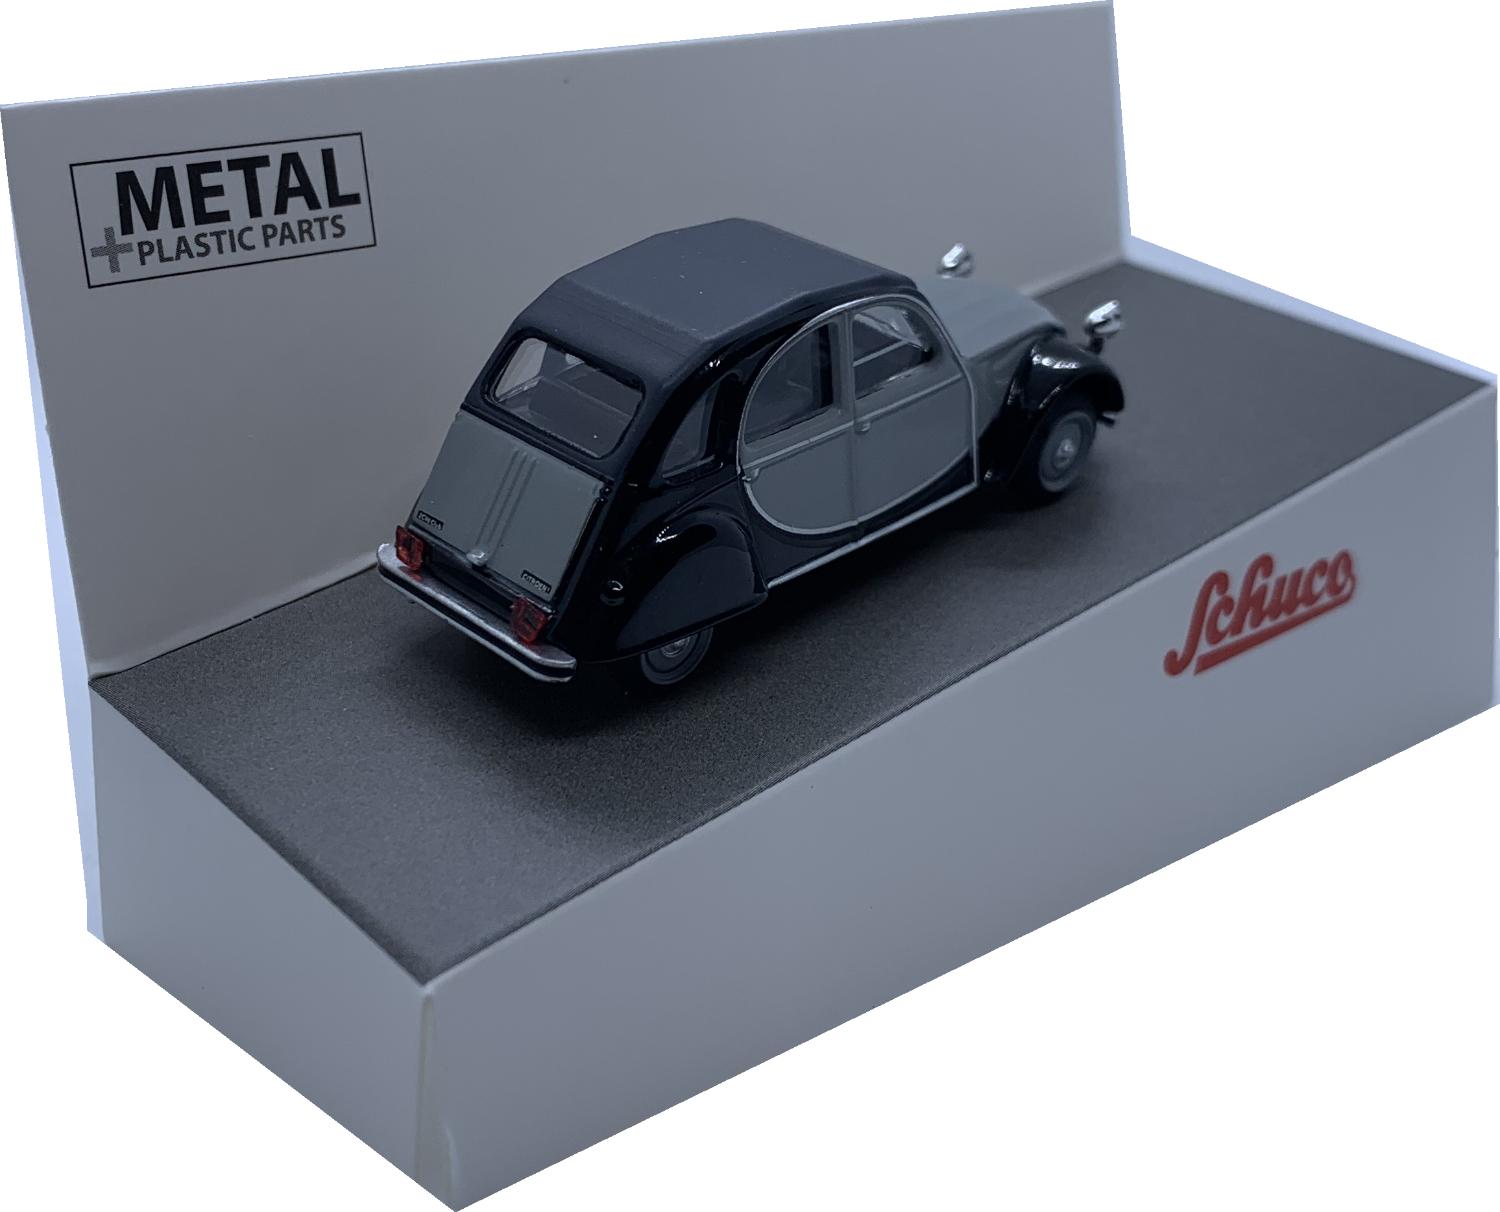 diecast models of Citroen cars in 1:64 scale